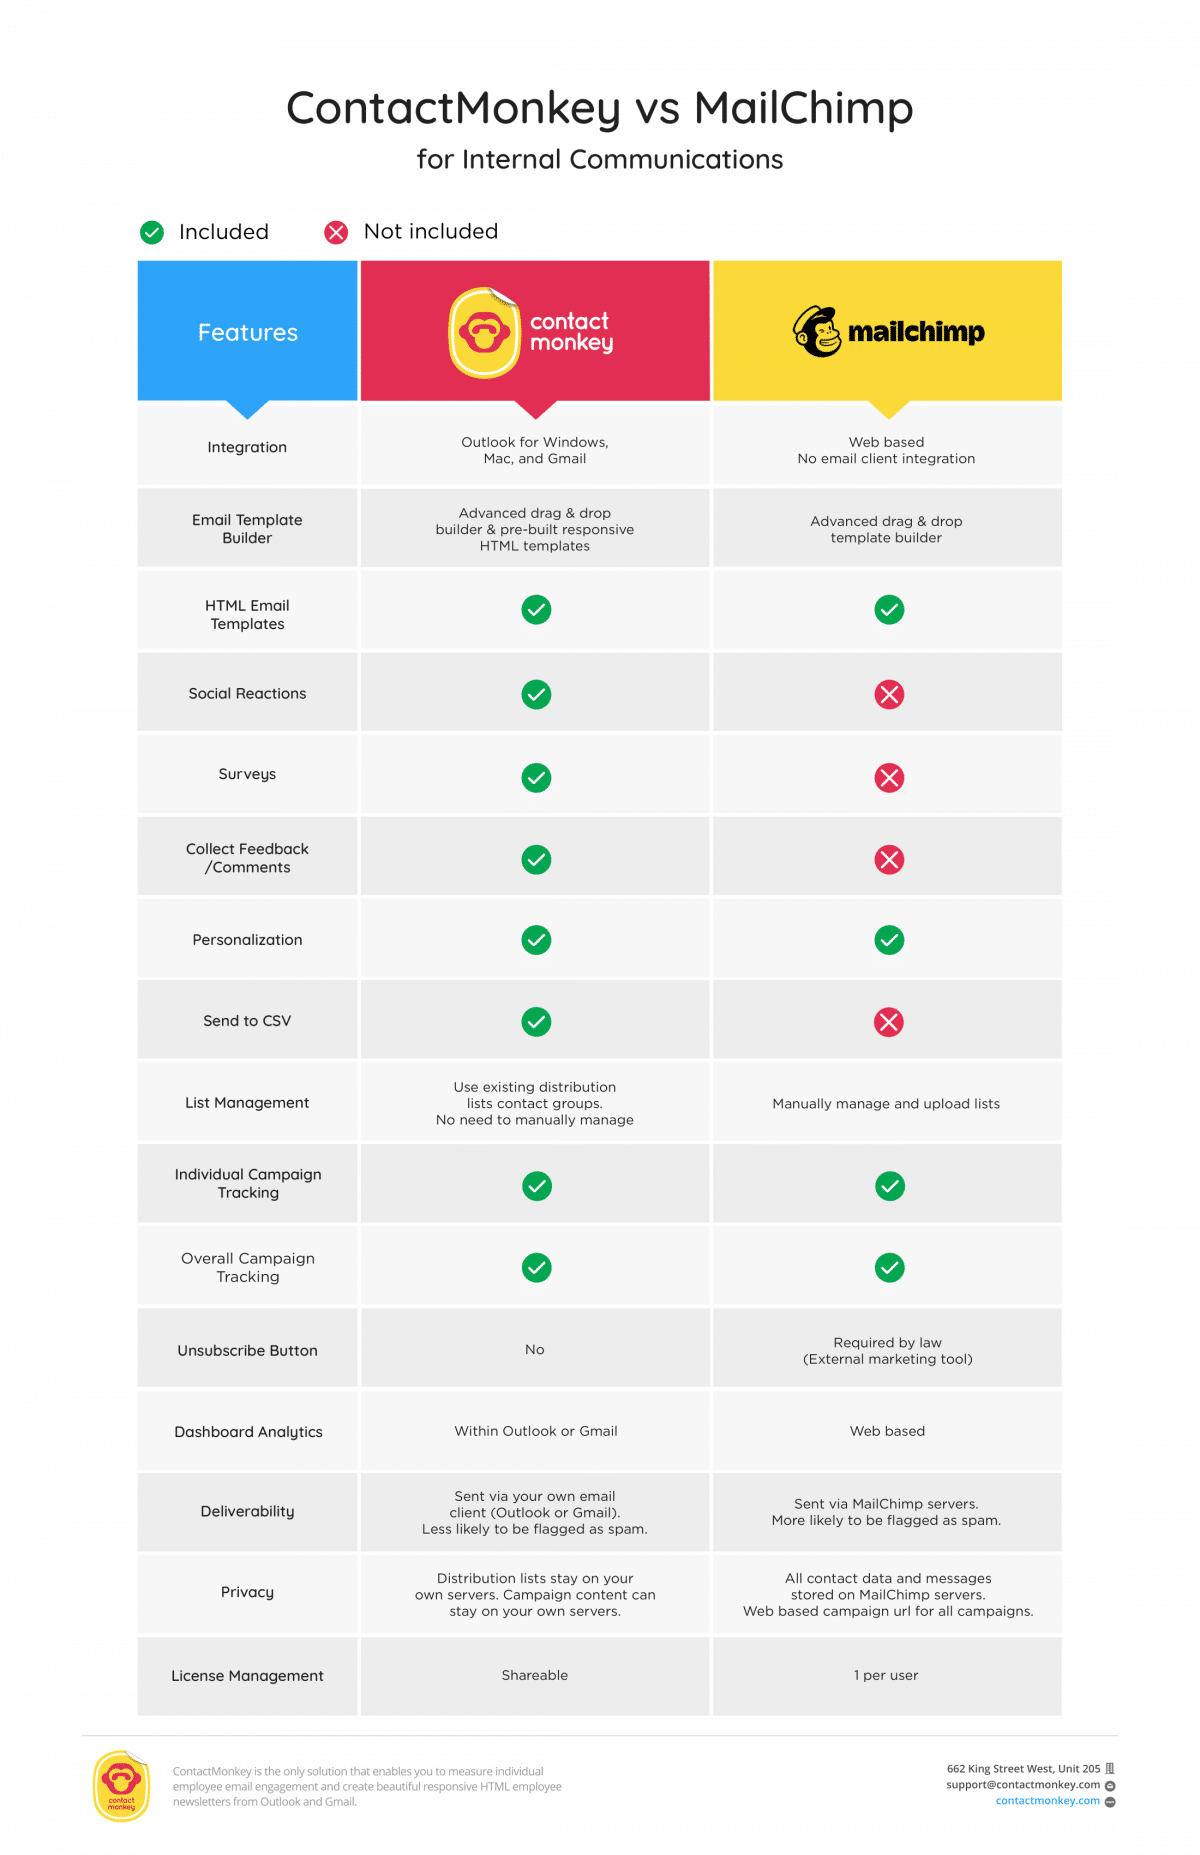 Image of comparison chart of ContactMonkey vs. Mailchimp for internal communications.